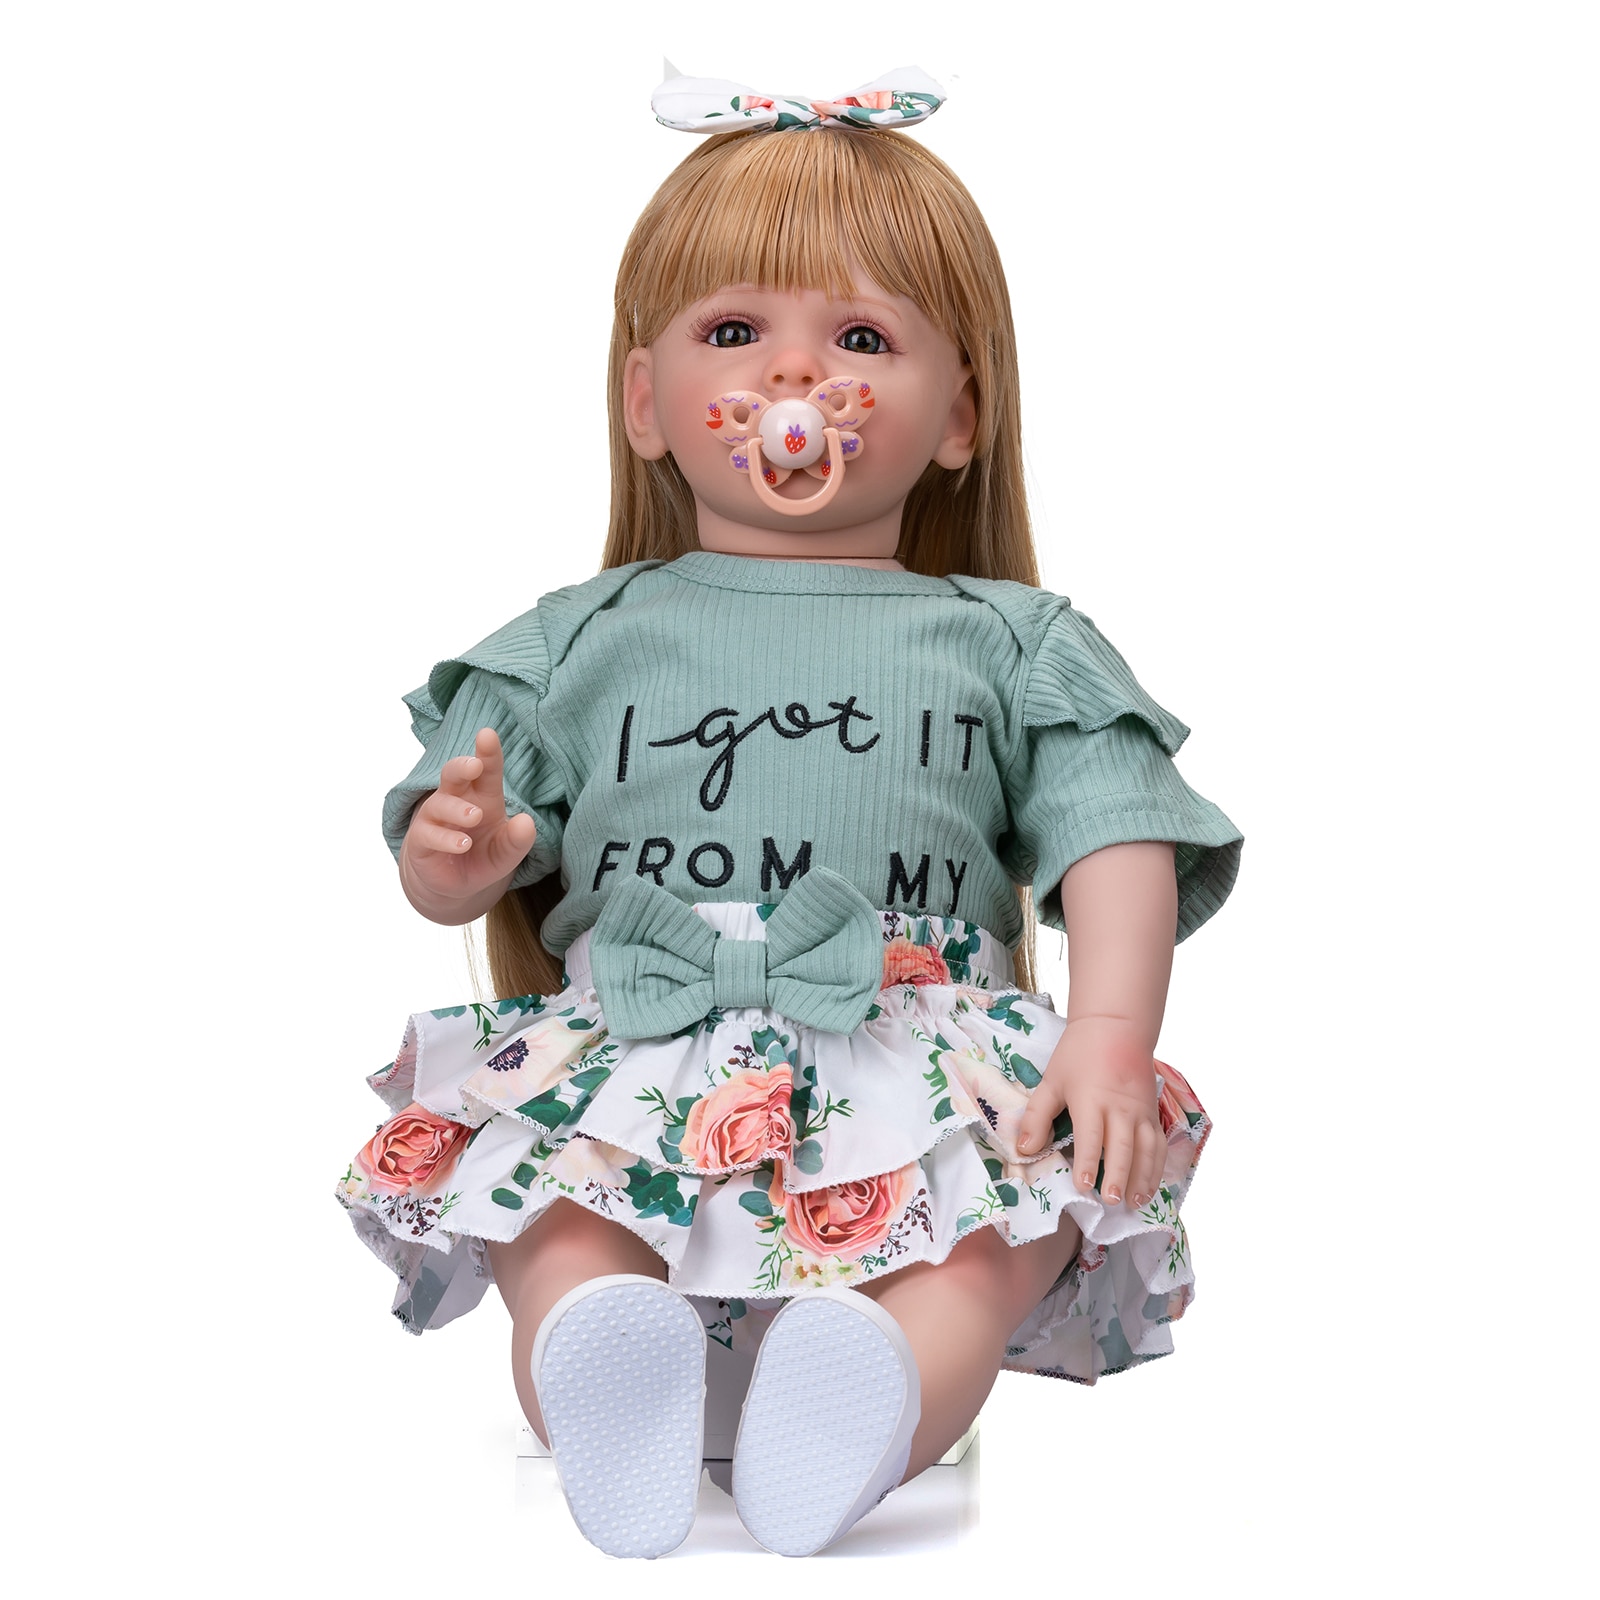 NPK-24inch-Already-Finished-Doll-Reborn-Toddler-Girl-Baby-Doll-Betty-Huge-Real-Baby-Size-3Month-3